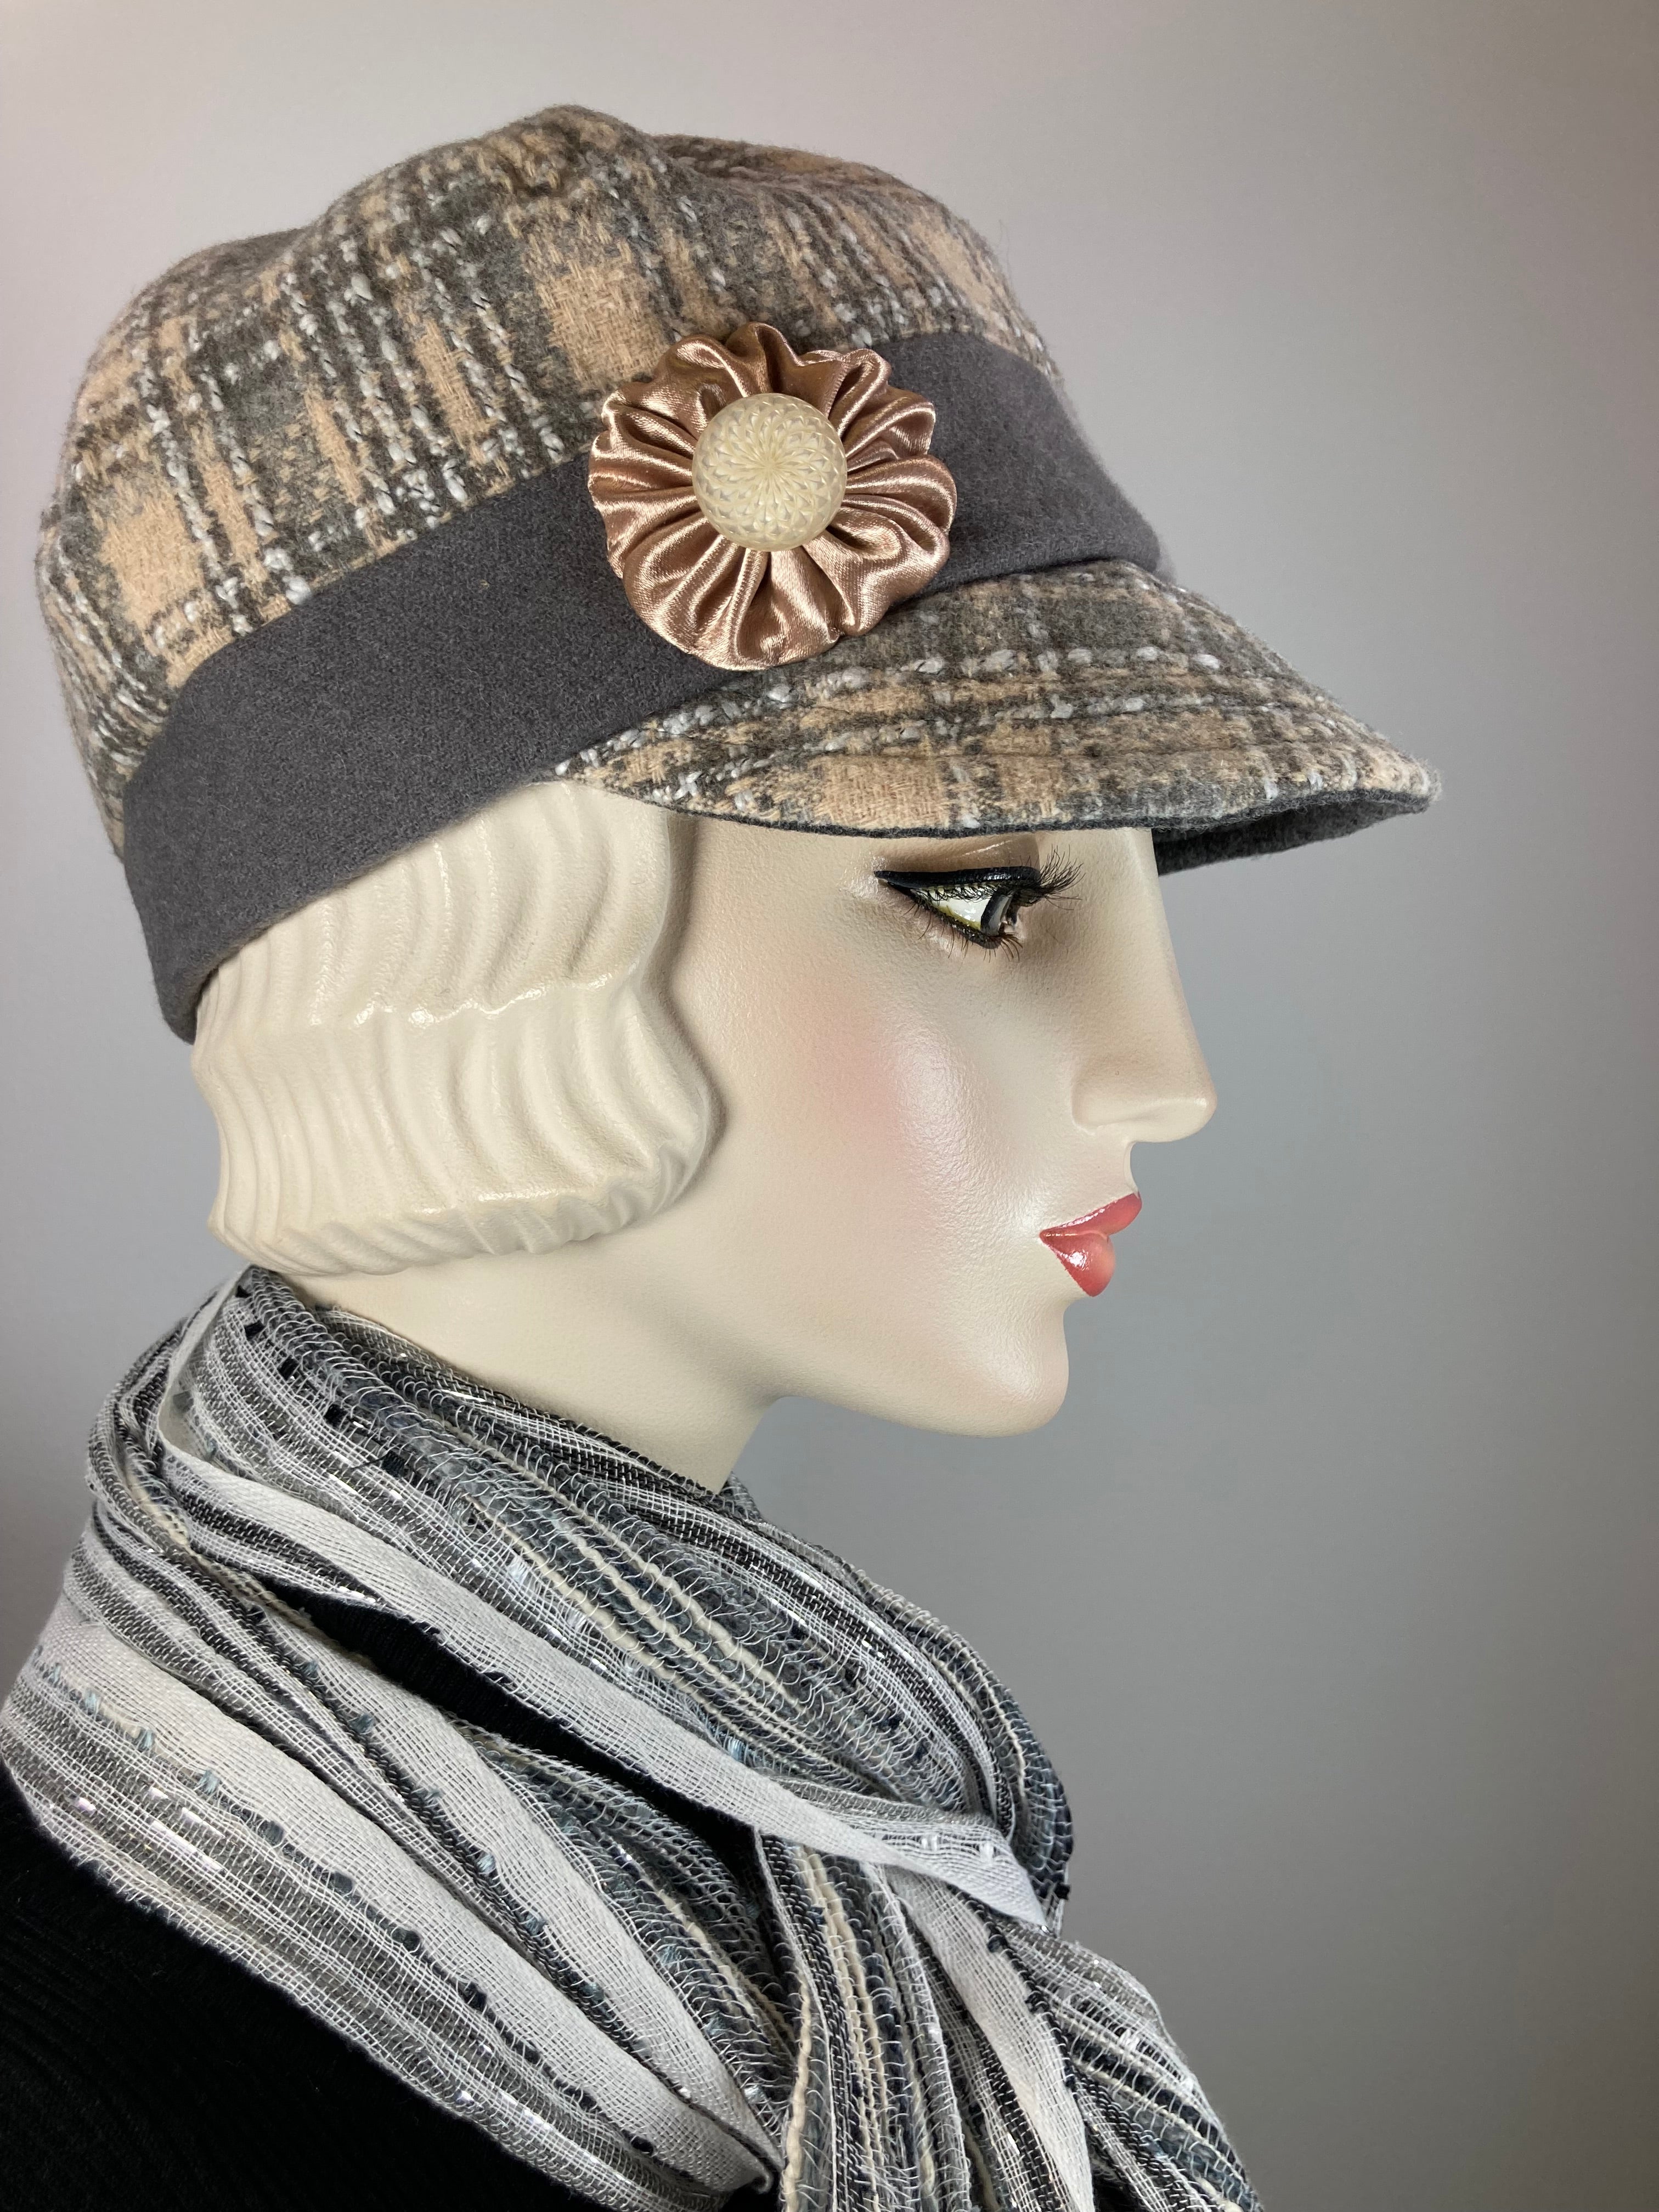 Women's winter hat baseball style. Newsboy hat beige and gray. Casual hat ladies. Warm comfy hat. Stylish fabric hat. Ladies soft hat.